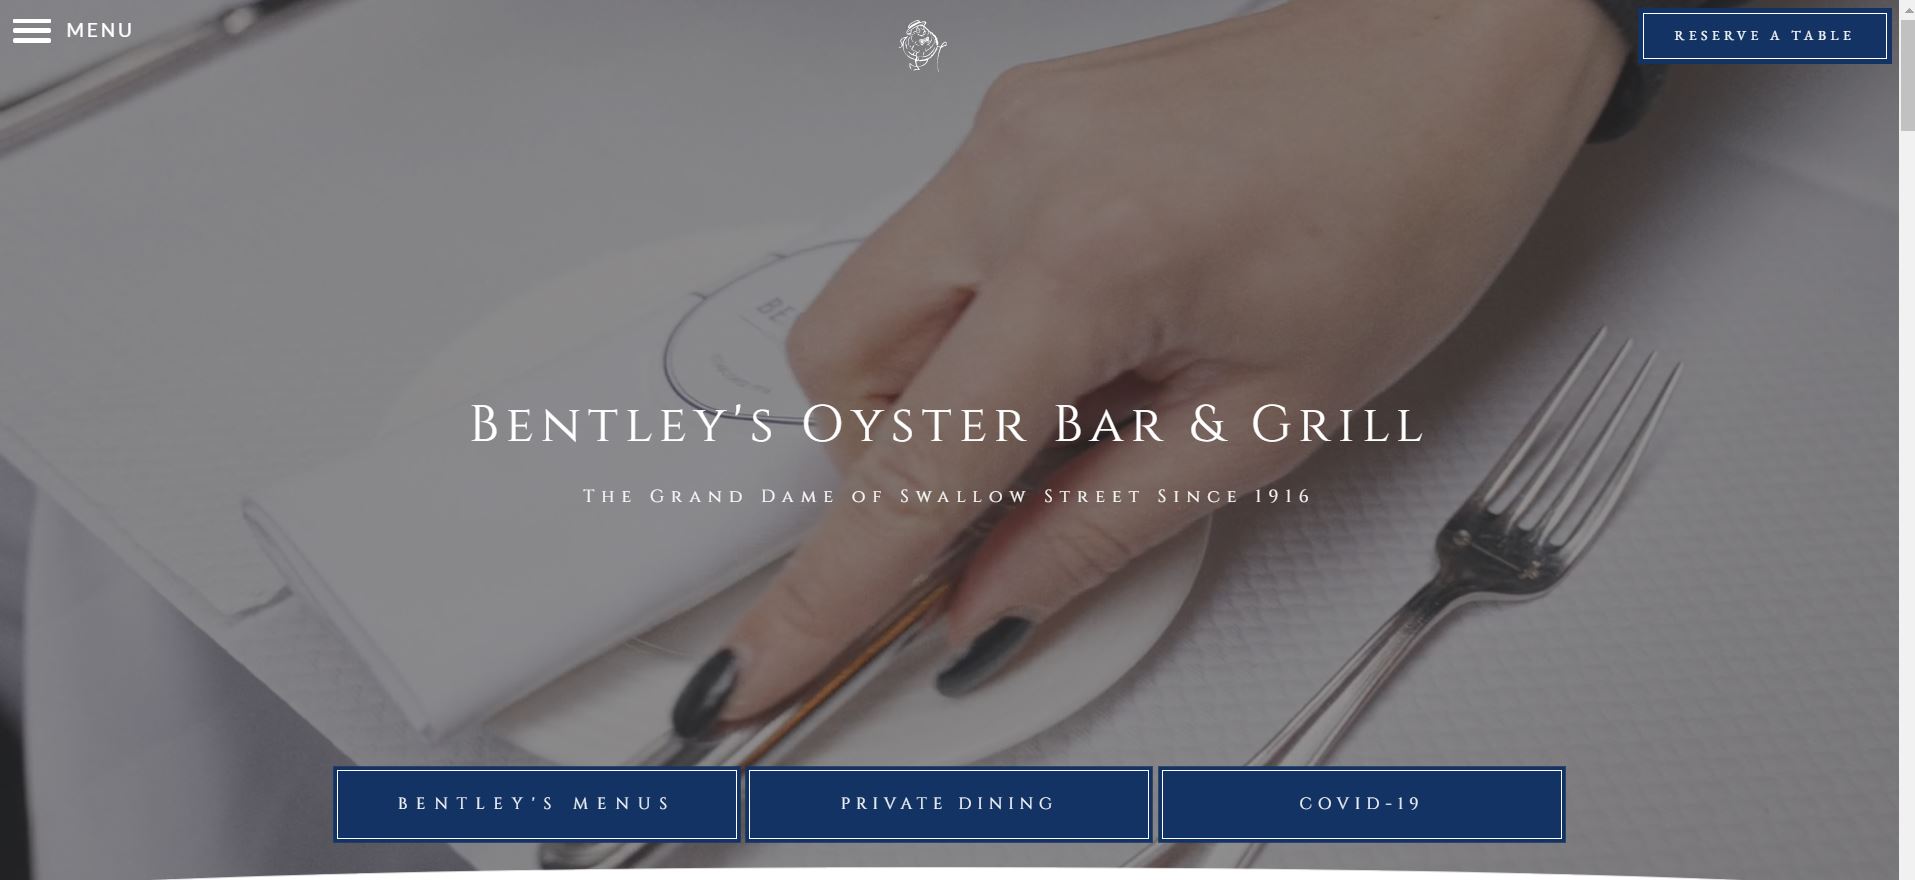 Bentley’s Oyster Bar and Grill